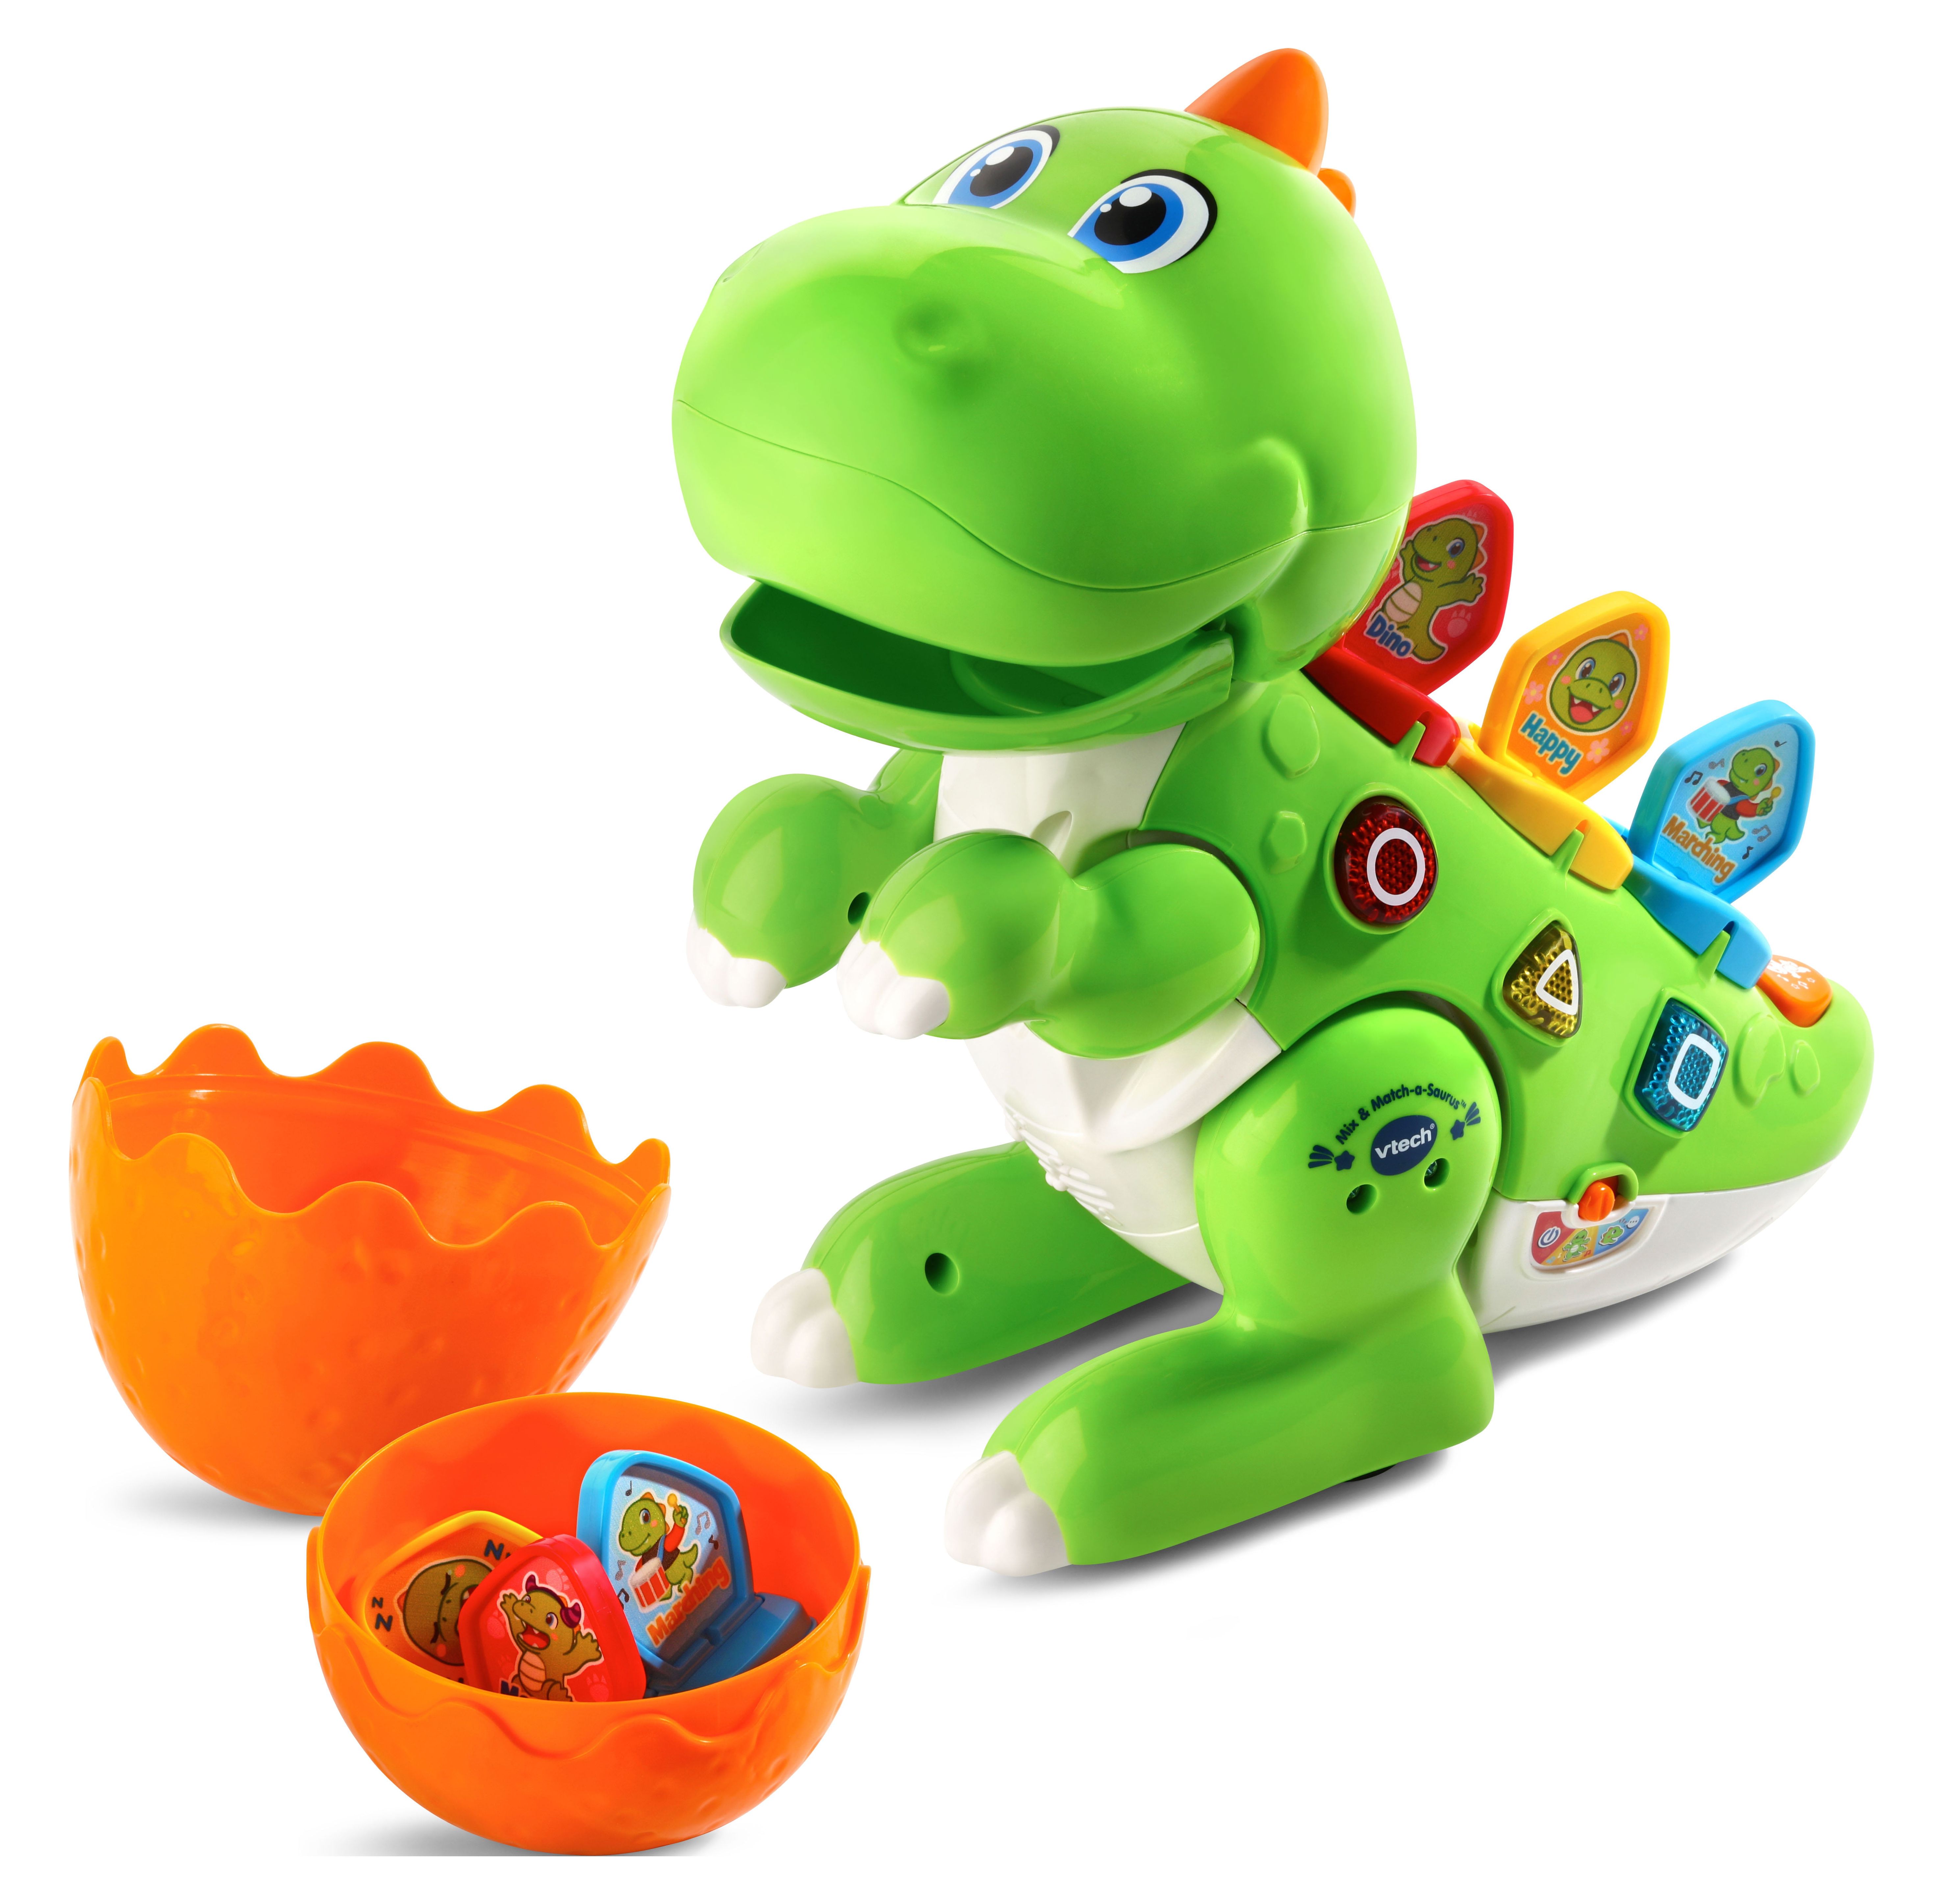 VTech Mix and Match-a-Saurus, Dinosaur Learning Toy for Kids, Green - image 8 of 10